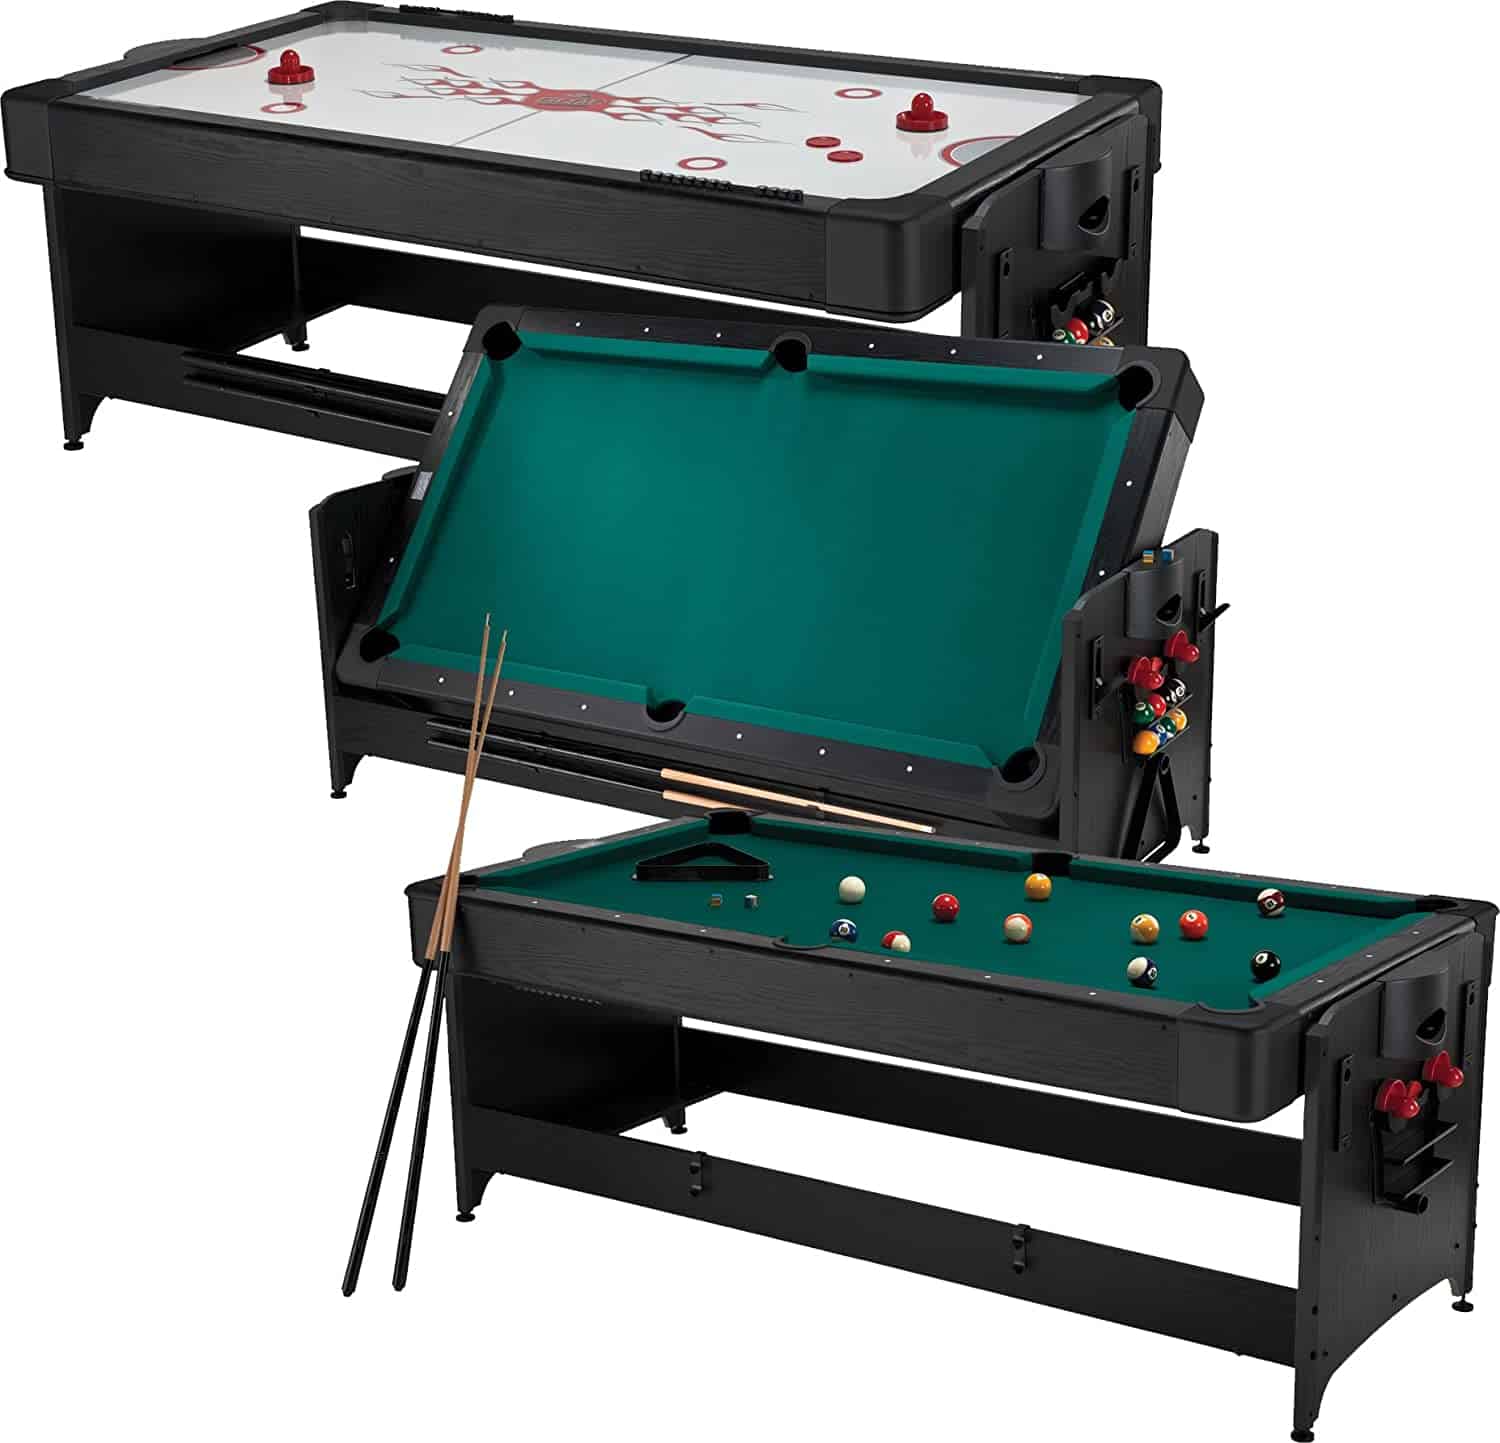 Best 2-in-1 Air Hockey & Pool Table: Fat Cat Cougar Reverso